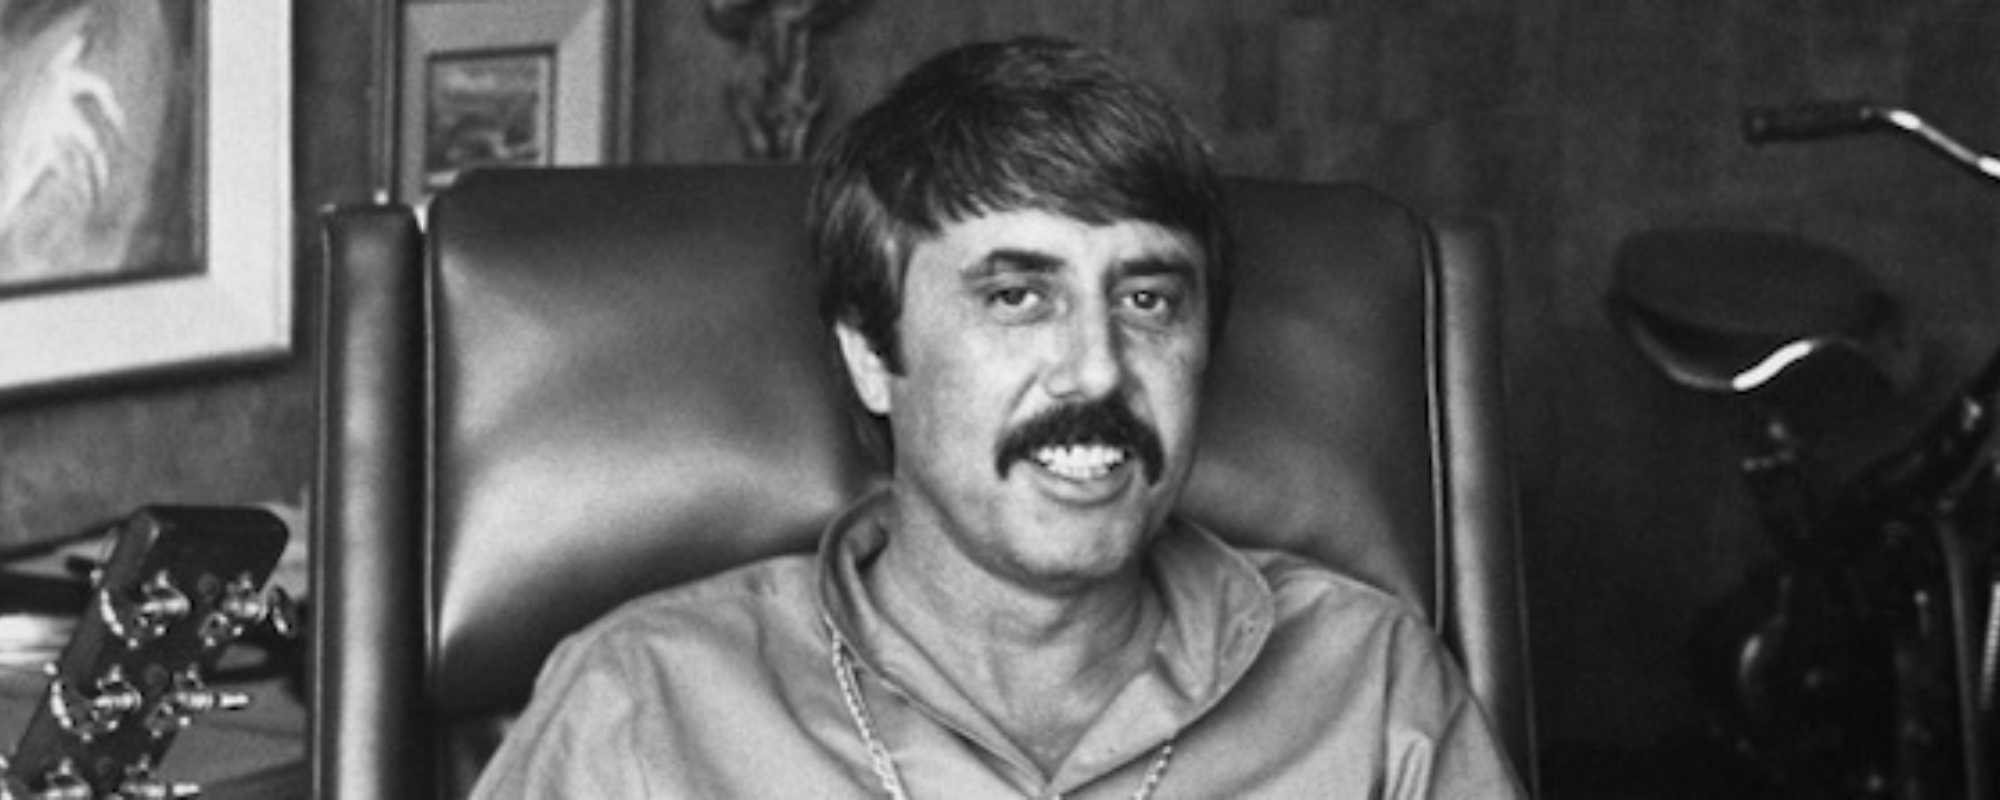 5 Fascinating Facts About Producer Lee Hazlewood, Who Gave Us “Rebel Rouser” and “These Boots Are Made for Walkin'”